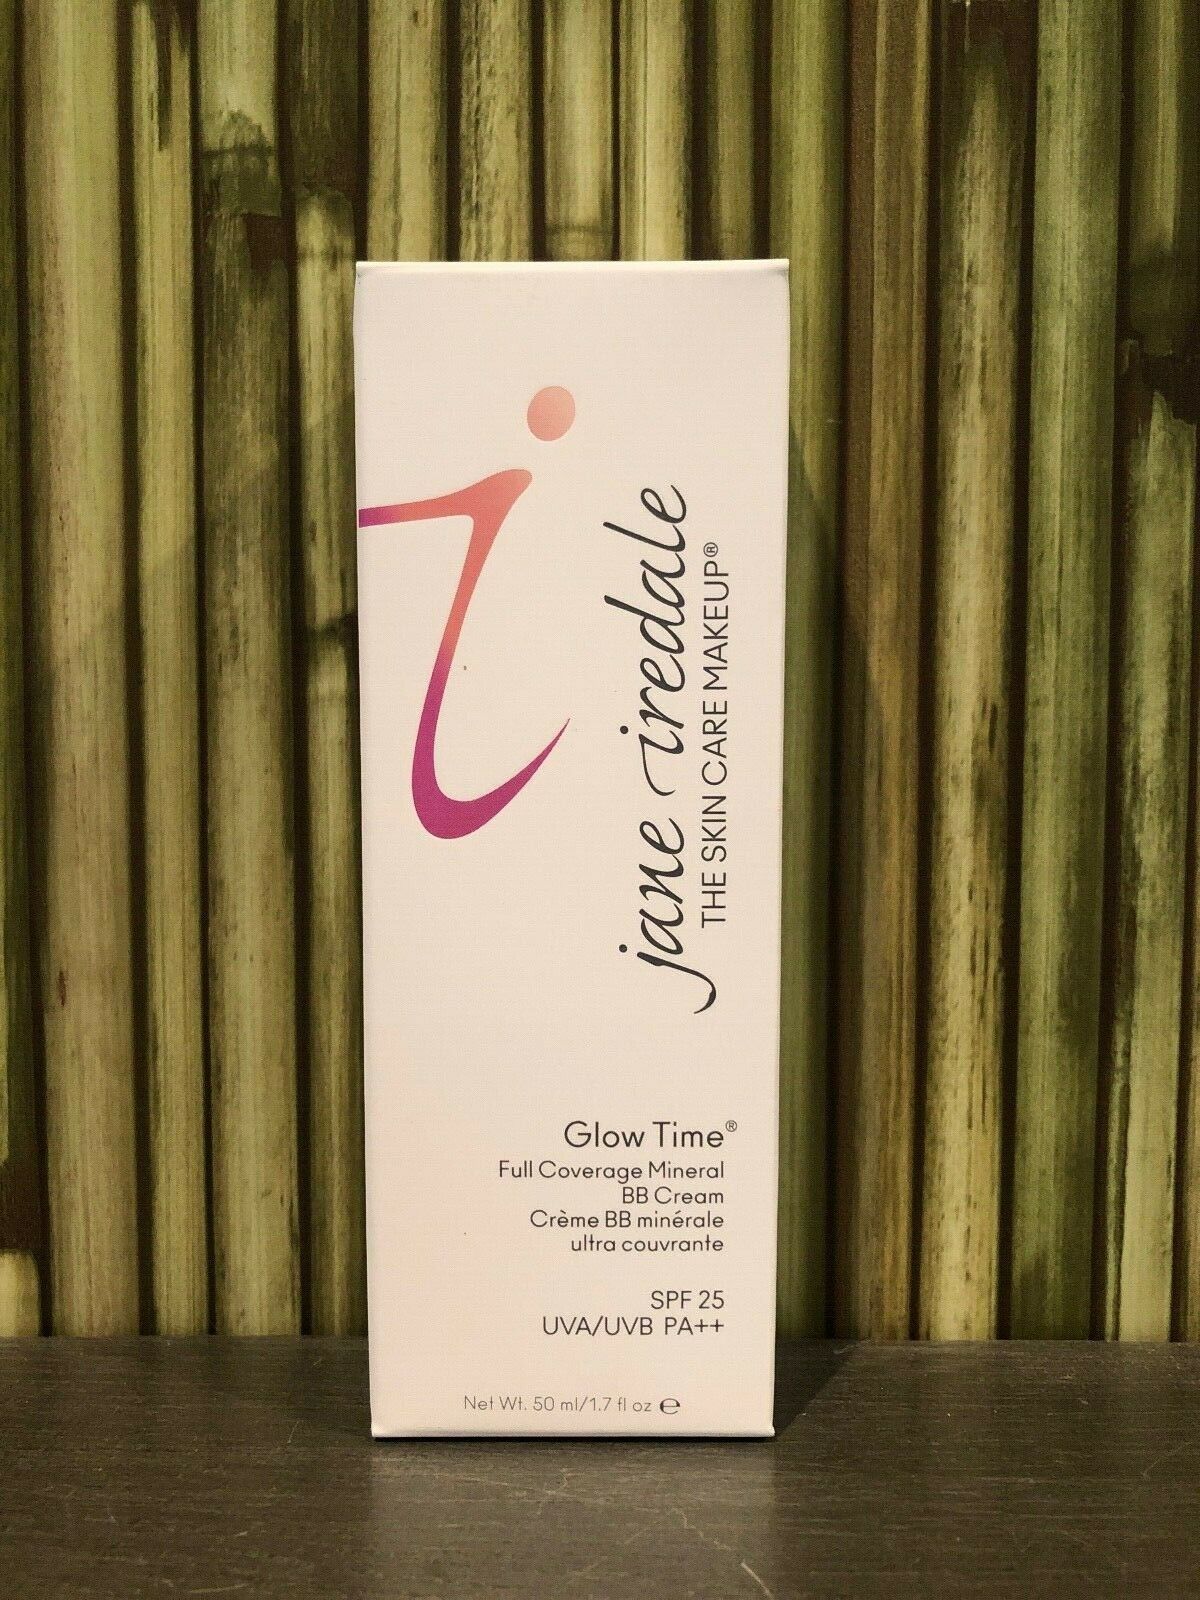 Jane Iredale Glow Time Full Coverage Mineral Bb Cream Spf 25 New In Box